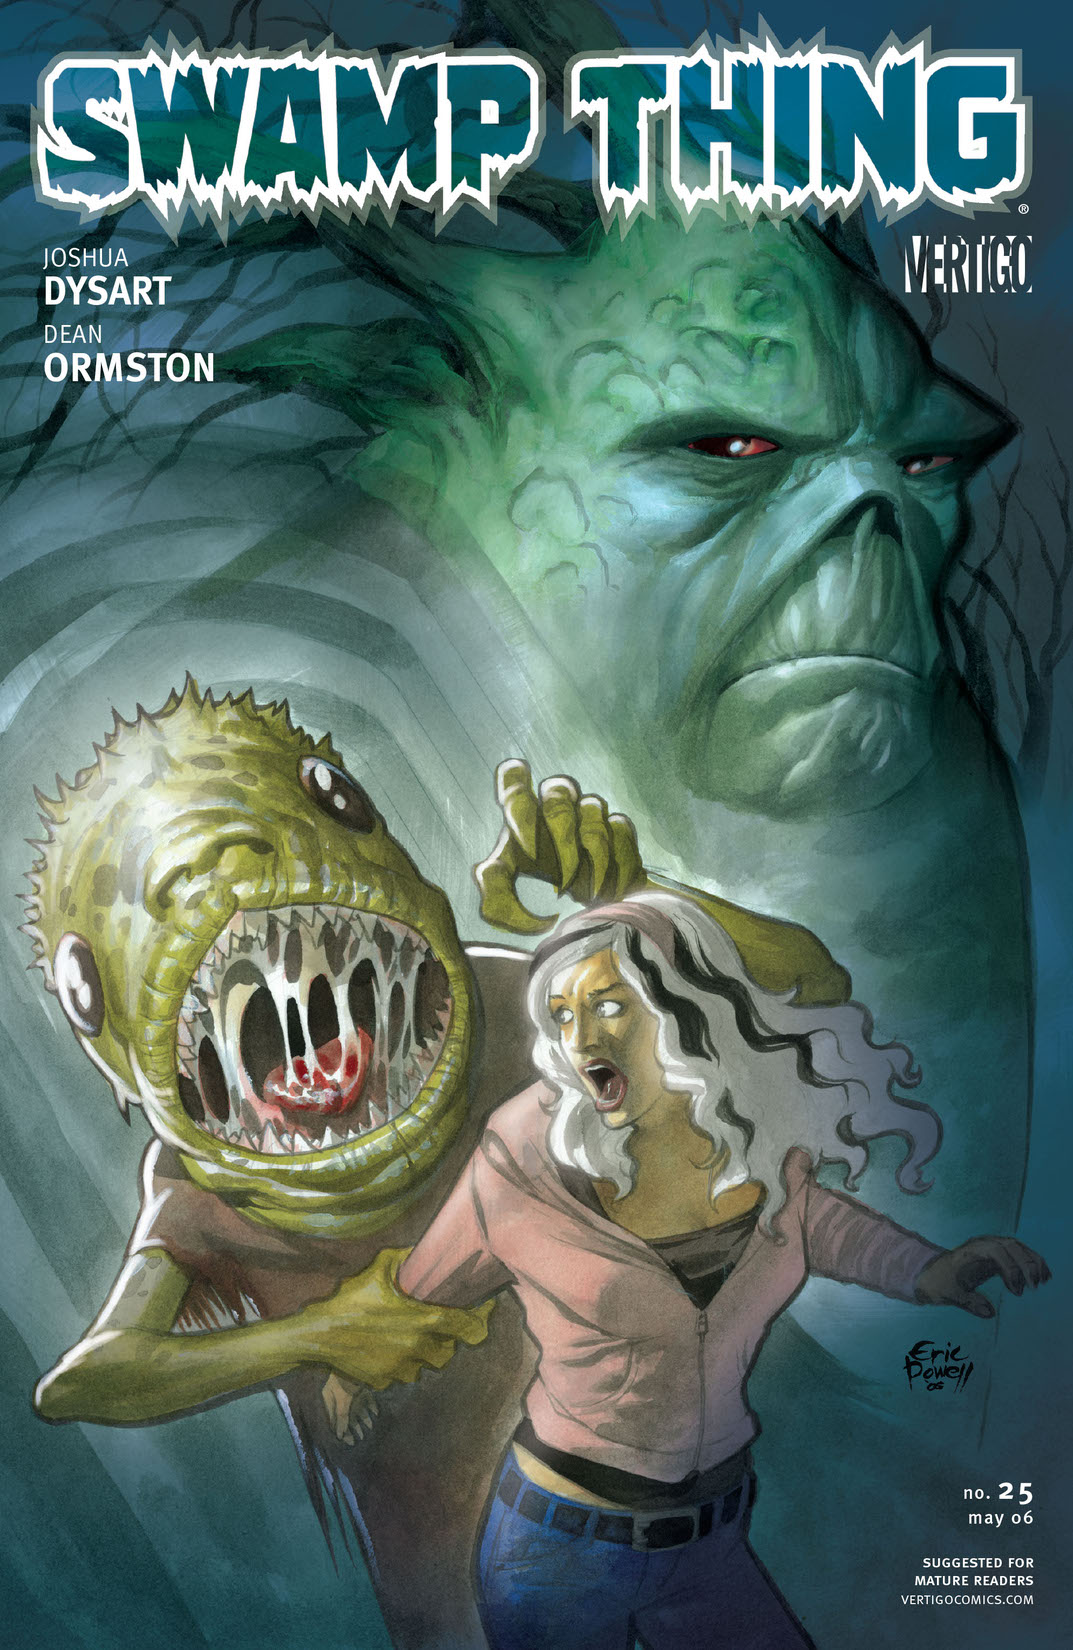 Swamp Thing (2004-) #25 preview images